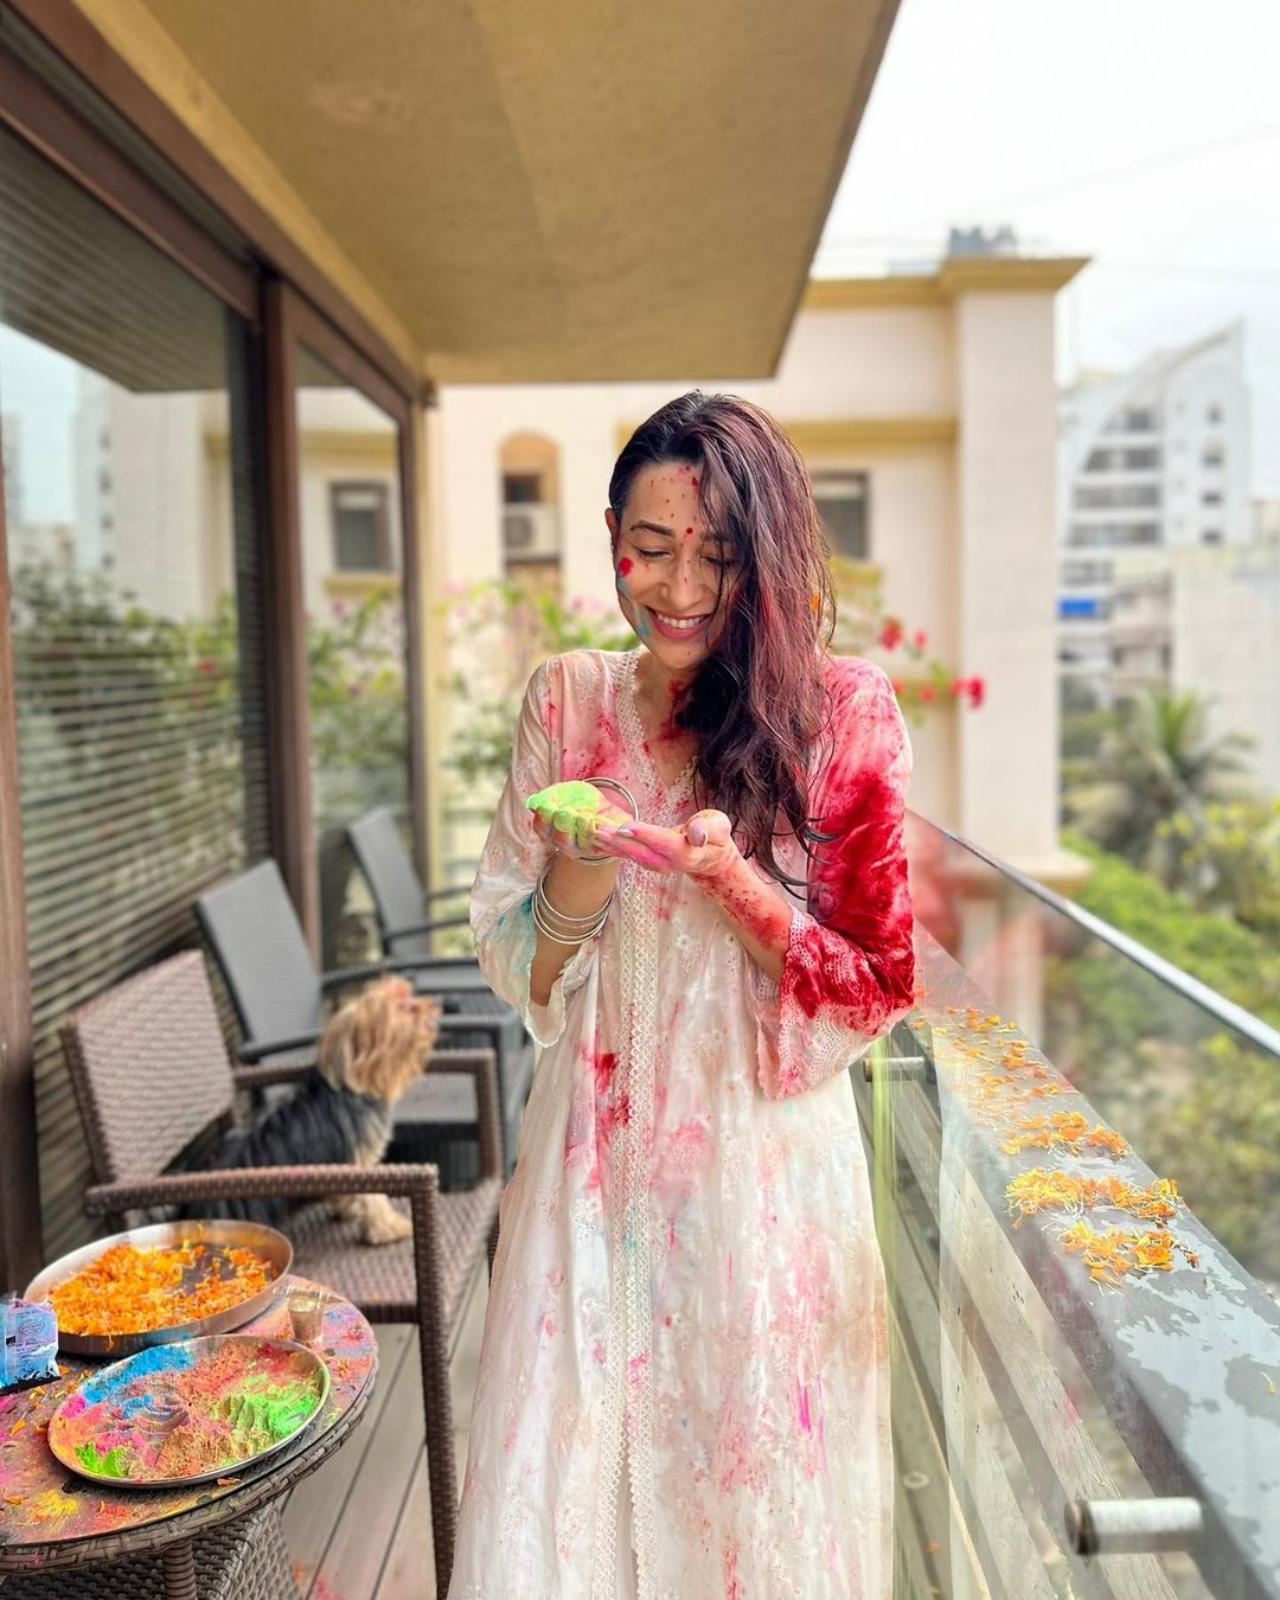 Karisma Kapoor defined self love as she shared a couple of pictures of herself enjoying the colours of Holi at the balcony of her home